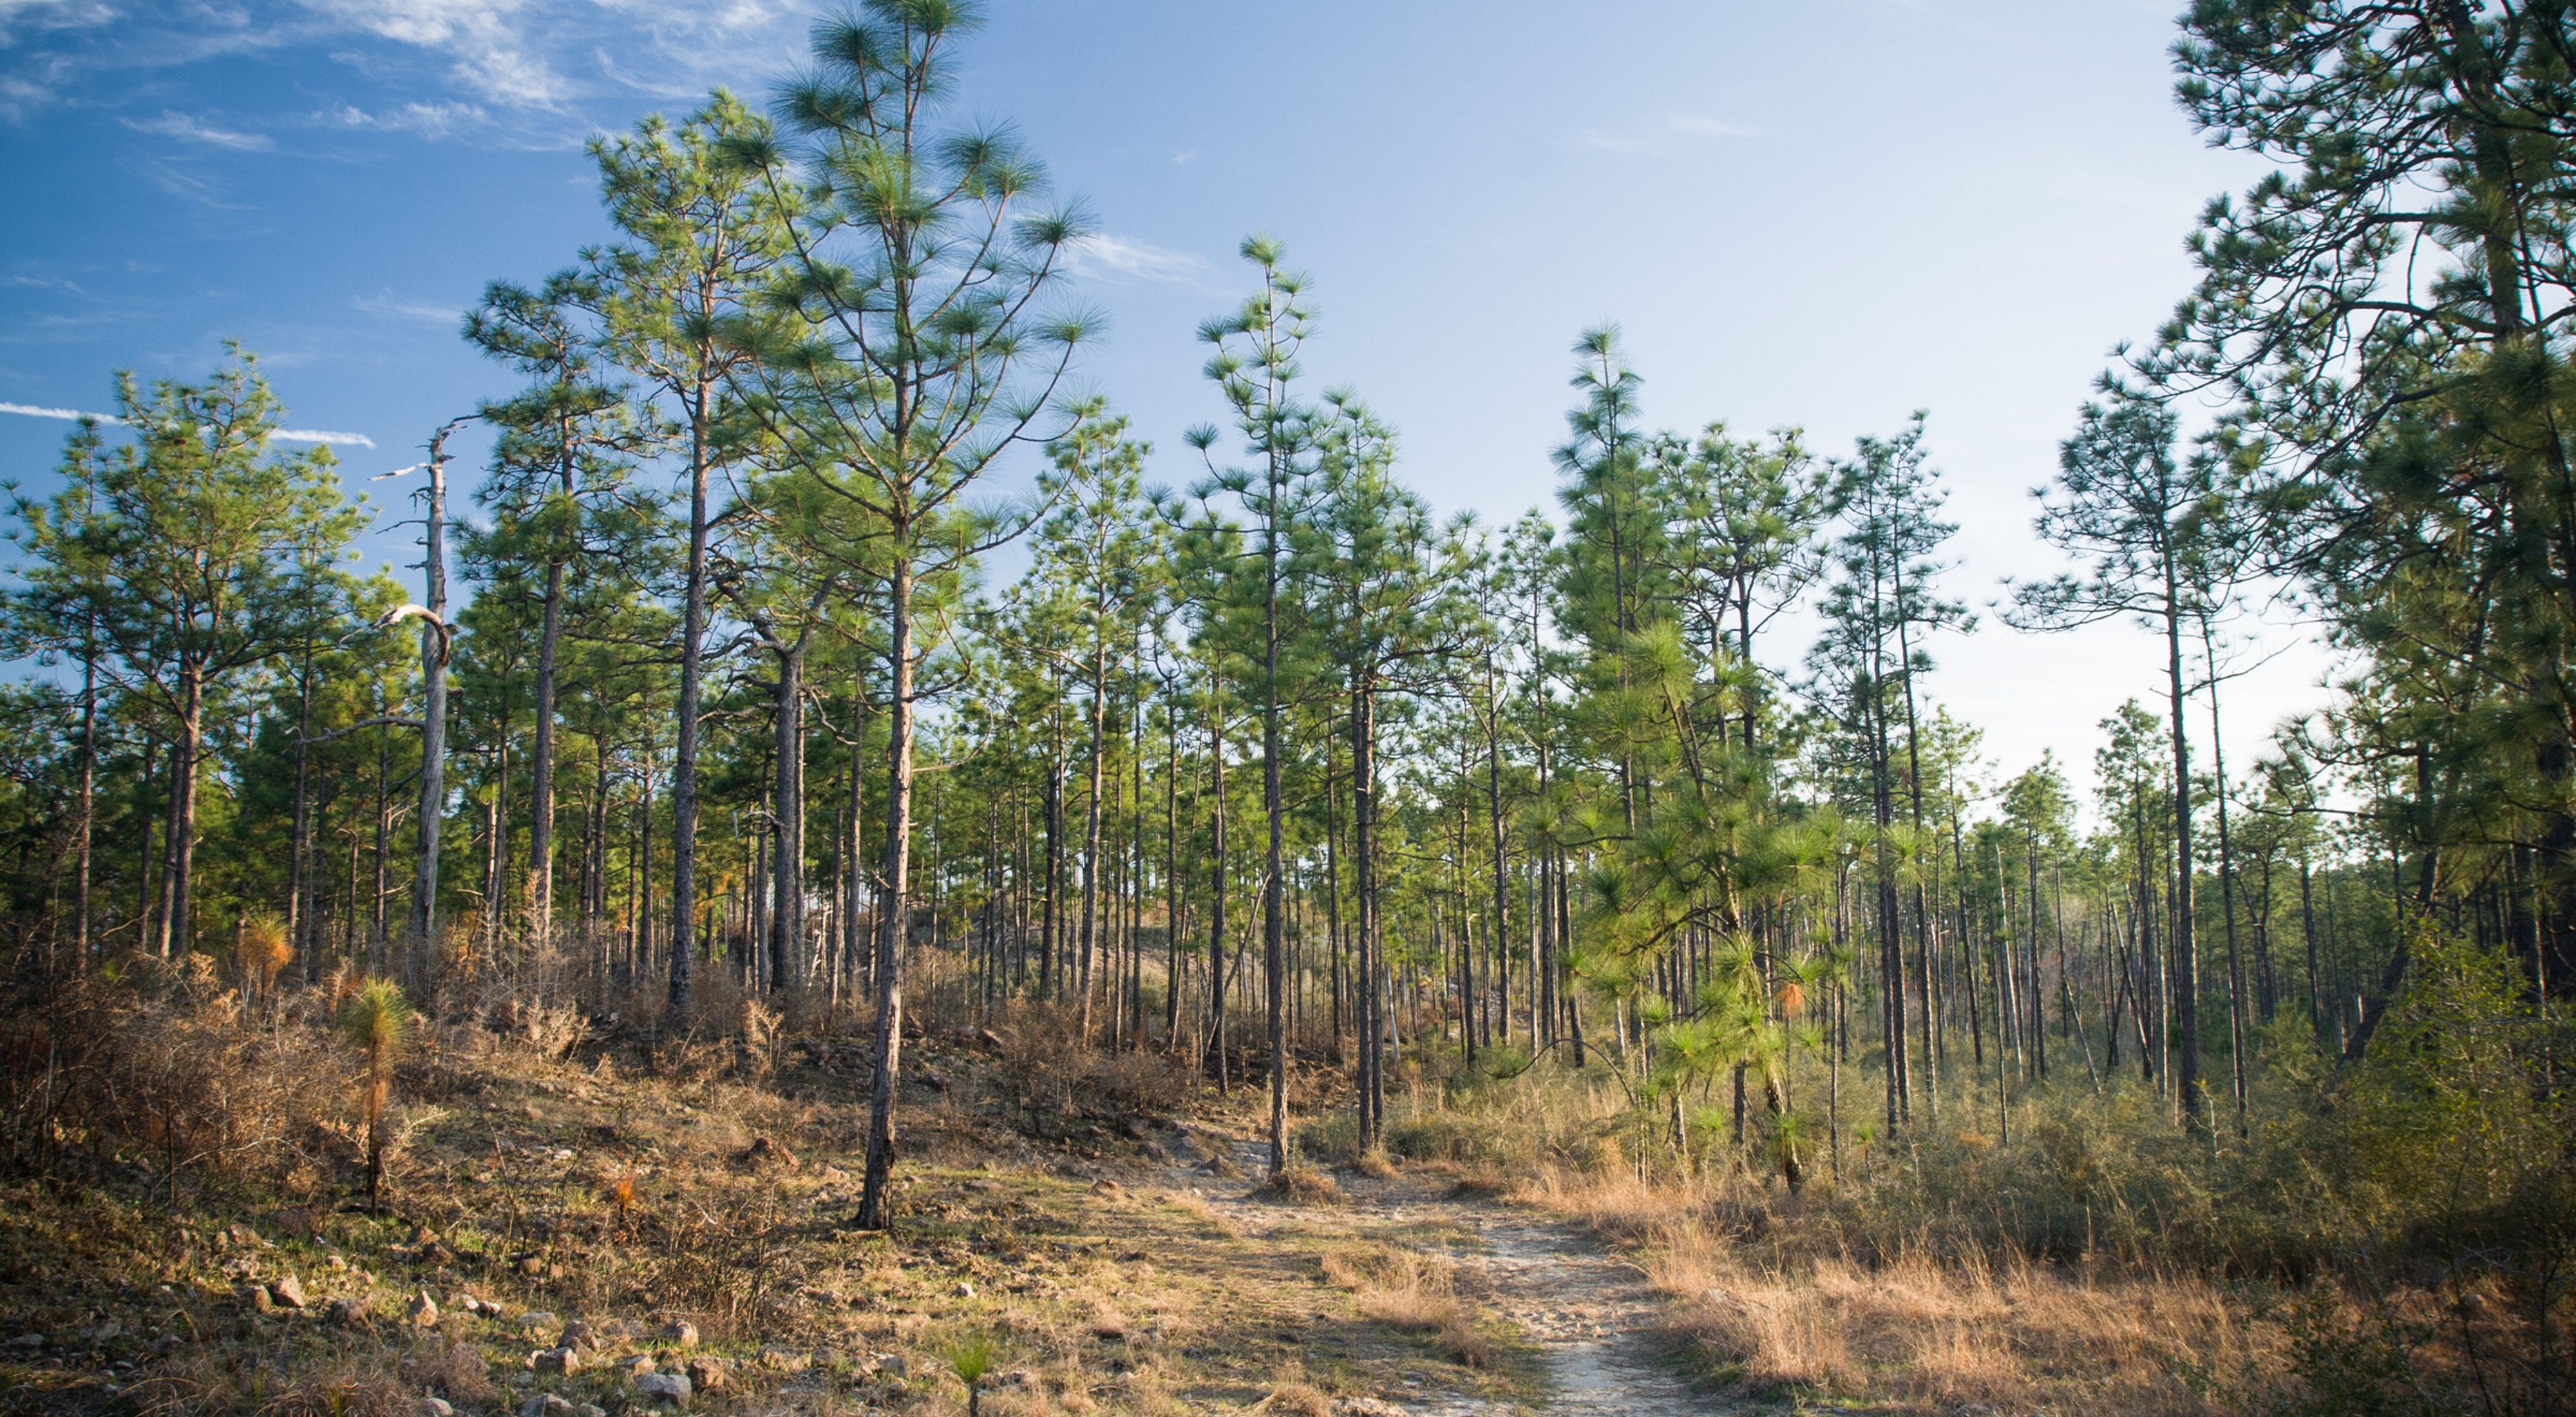 Longleaf pine thrive in the Kisatchie National Forest in Louisiana.